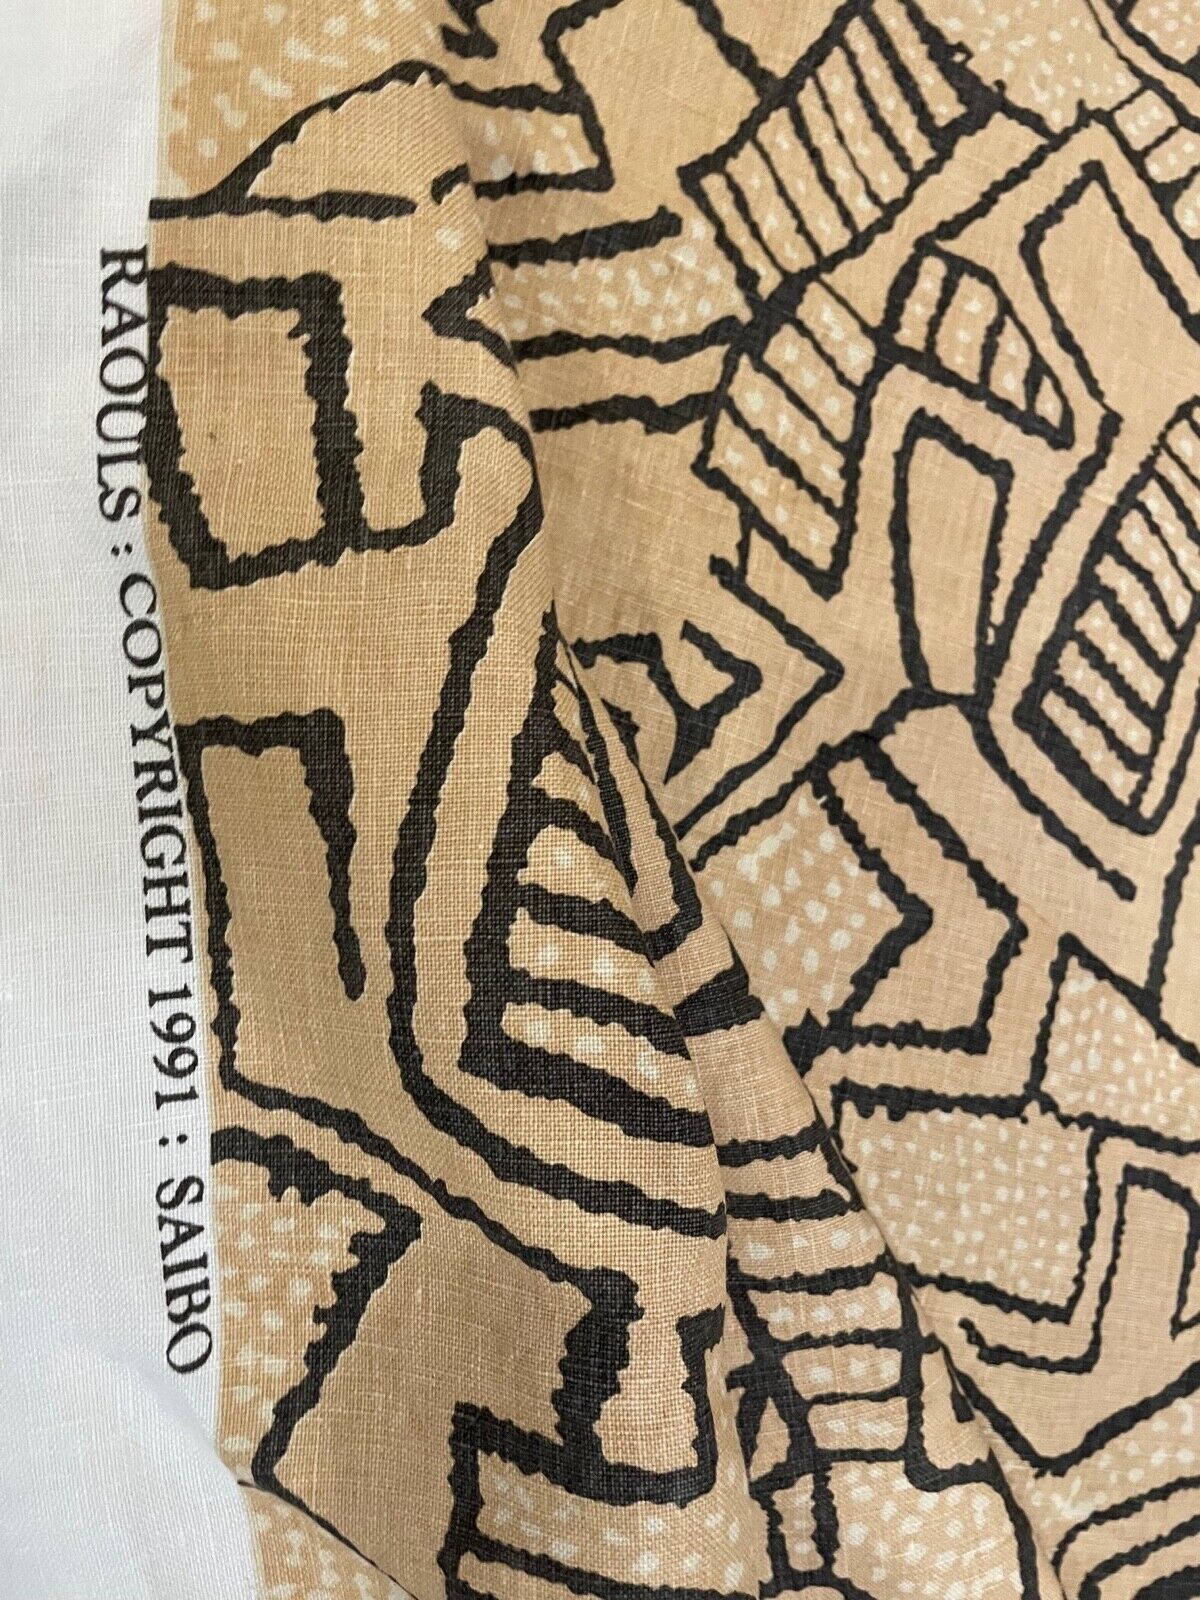 RAOUL TEXTILES Saibo hand printed linen camel brown white geometric new 2+ yards